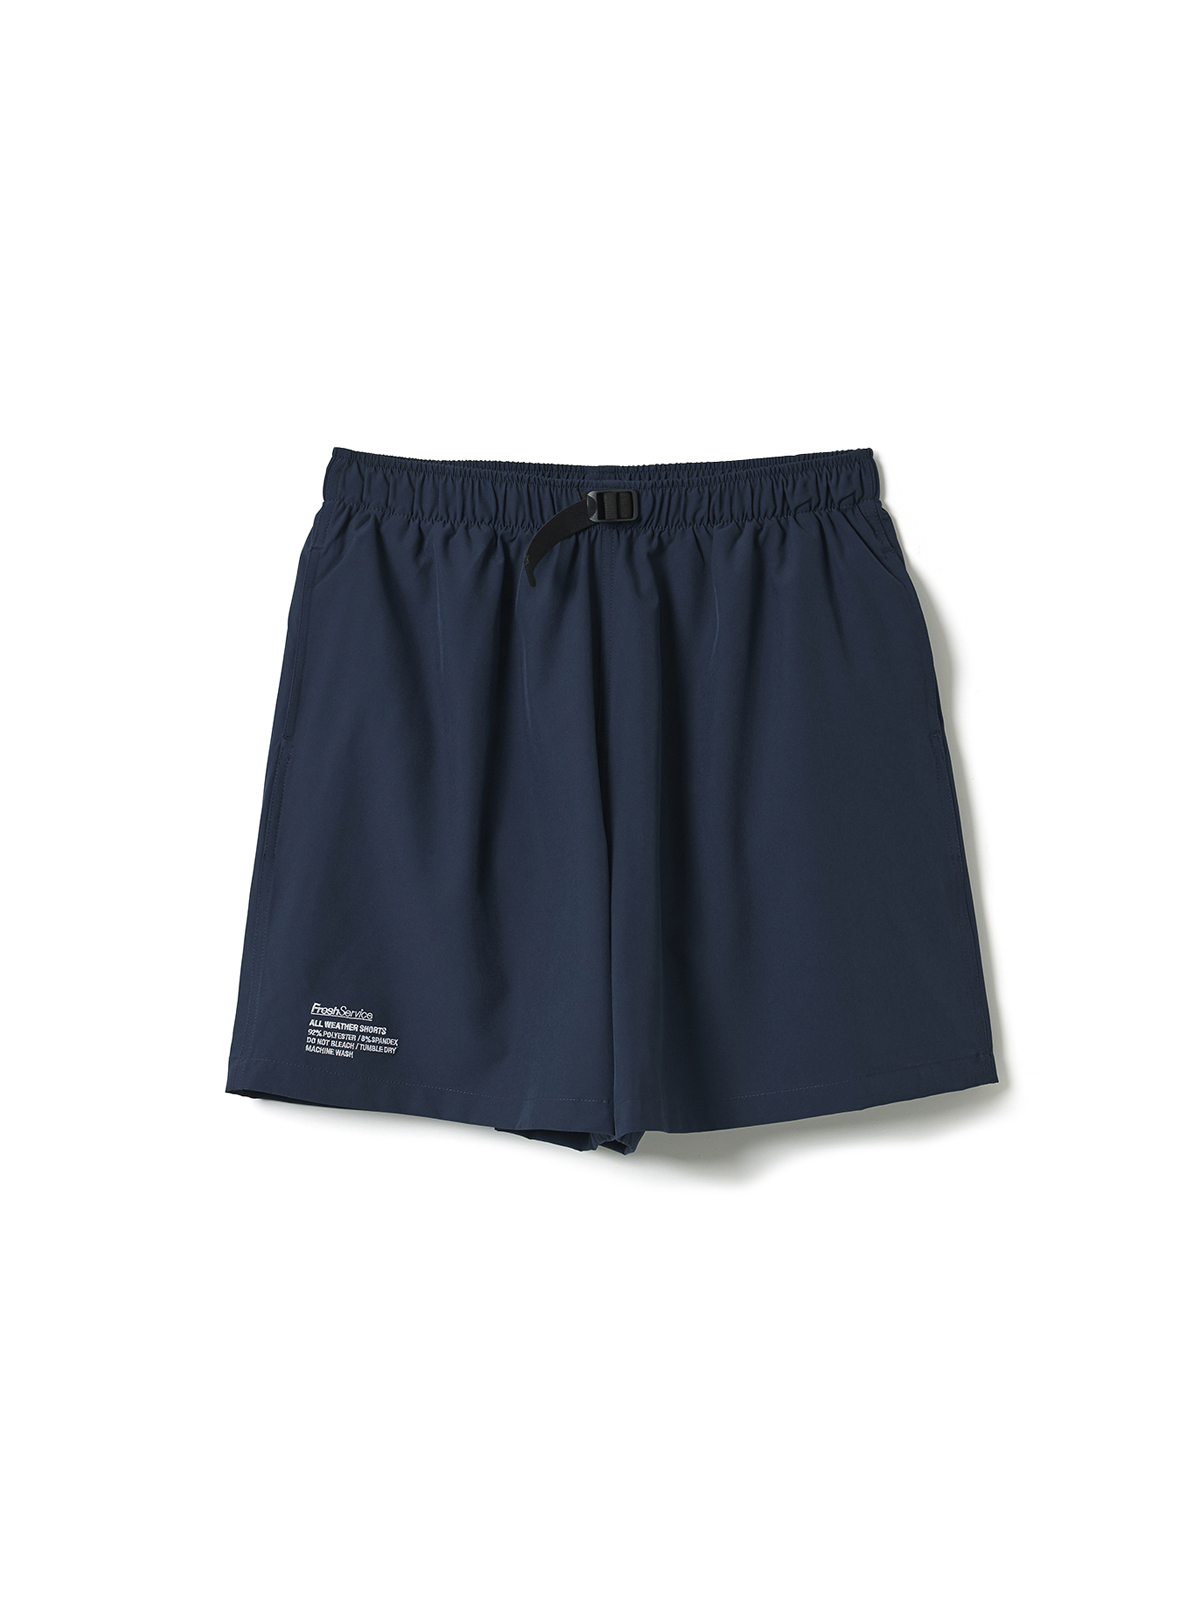 ALL WEATHER SHORTS (NAVY)